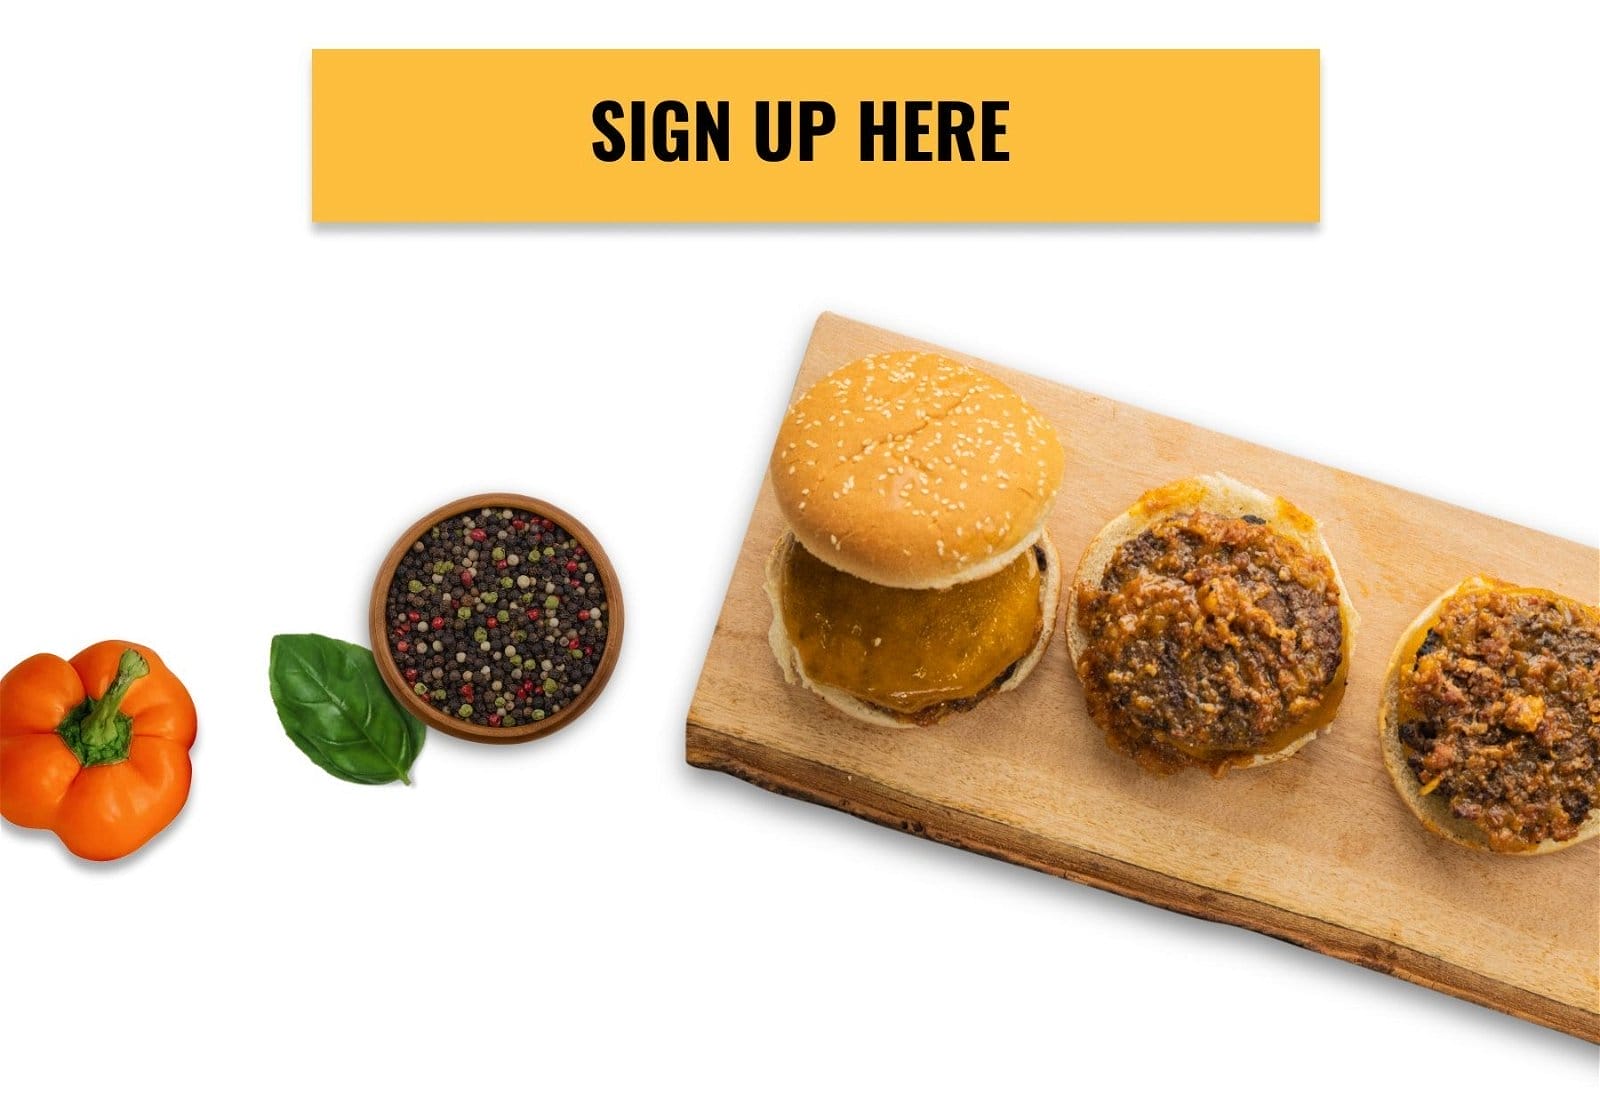 Sign up to get notified about March Meatness